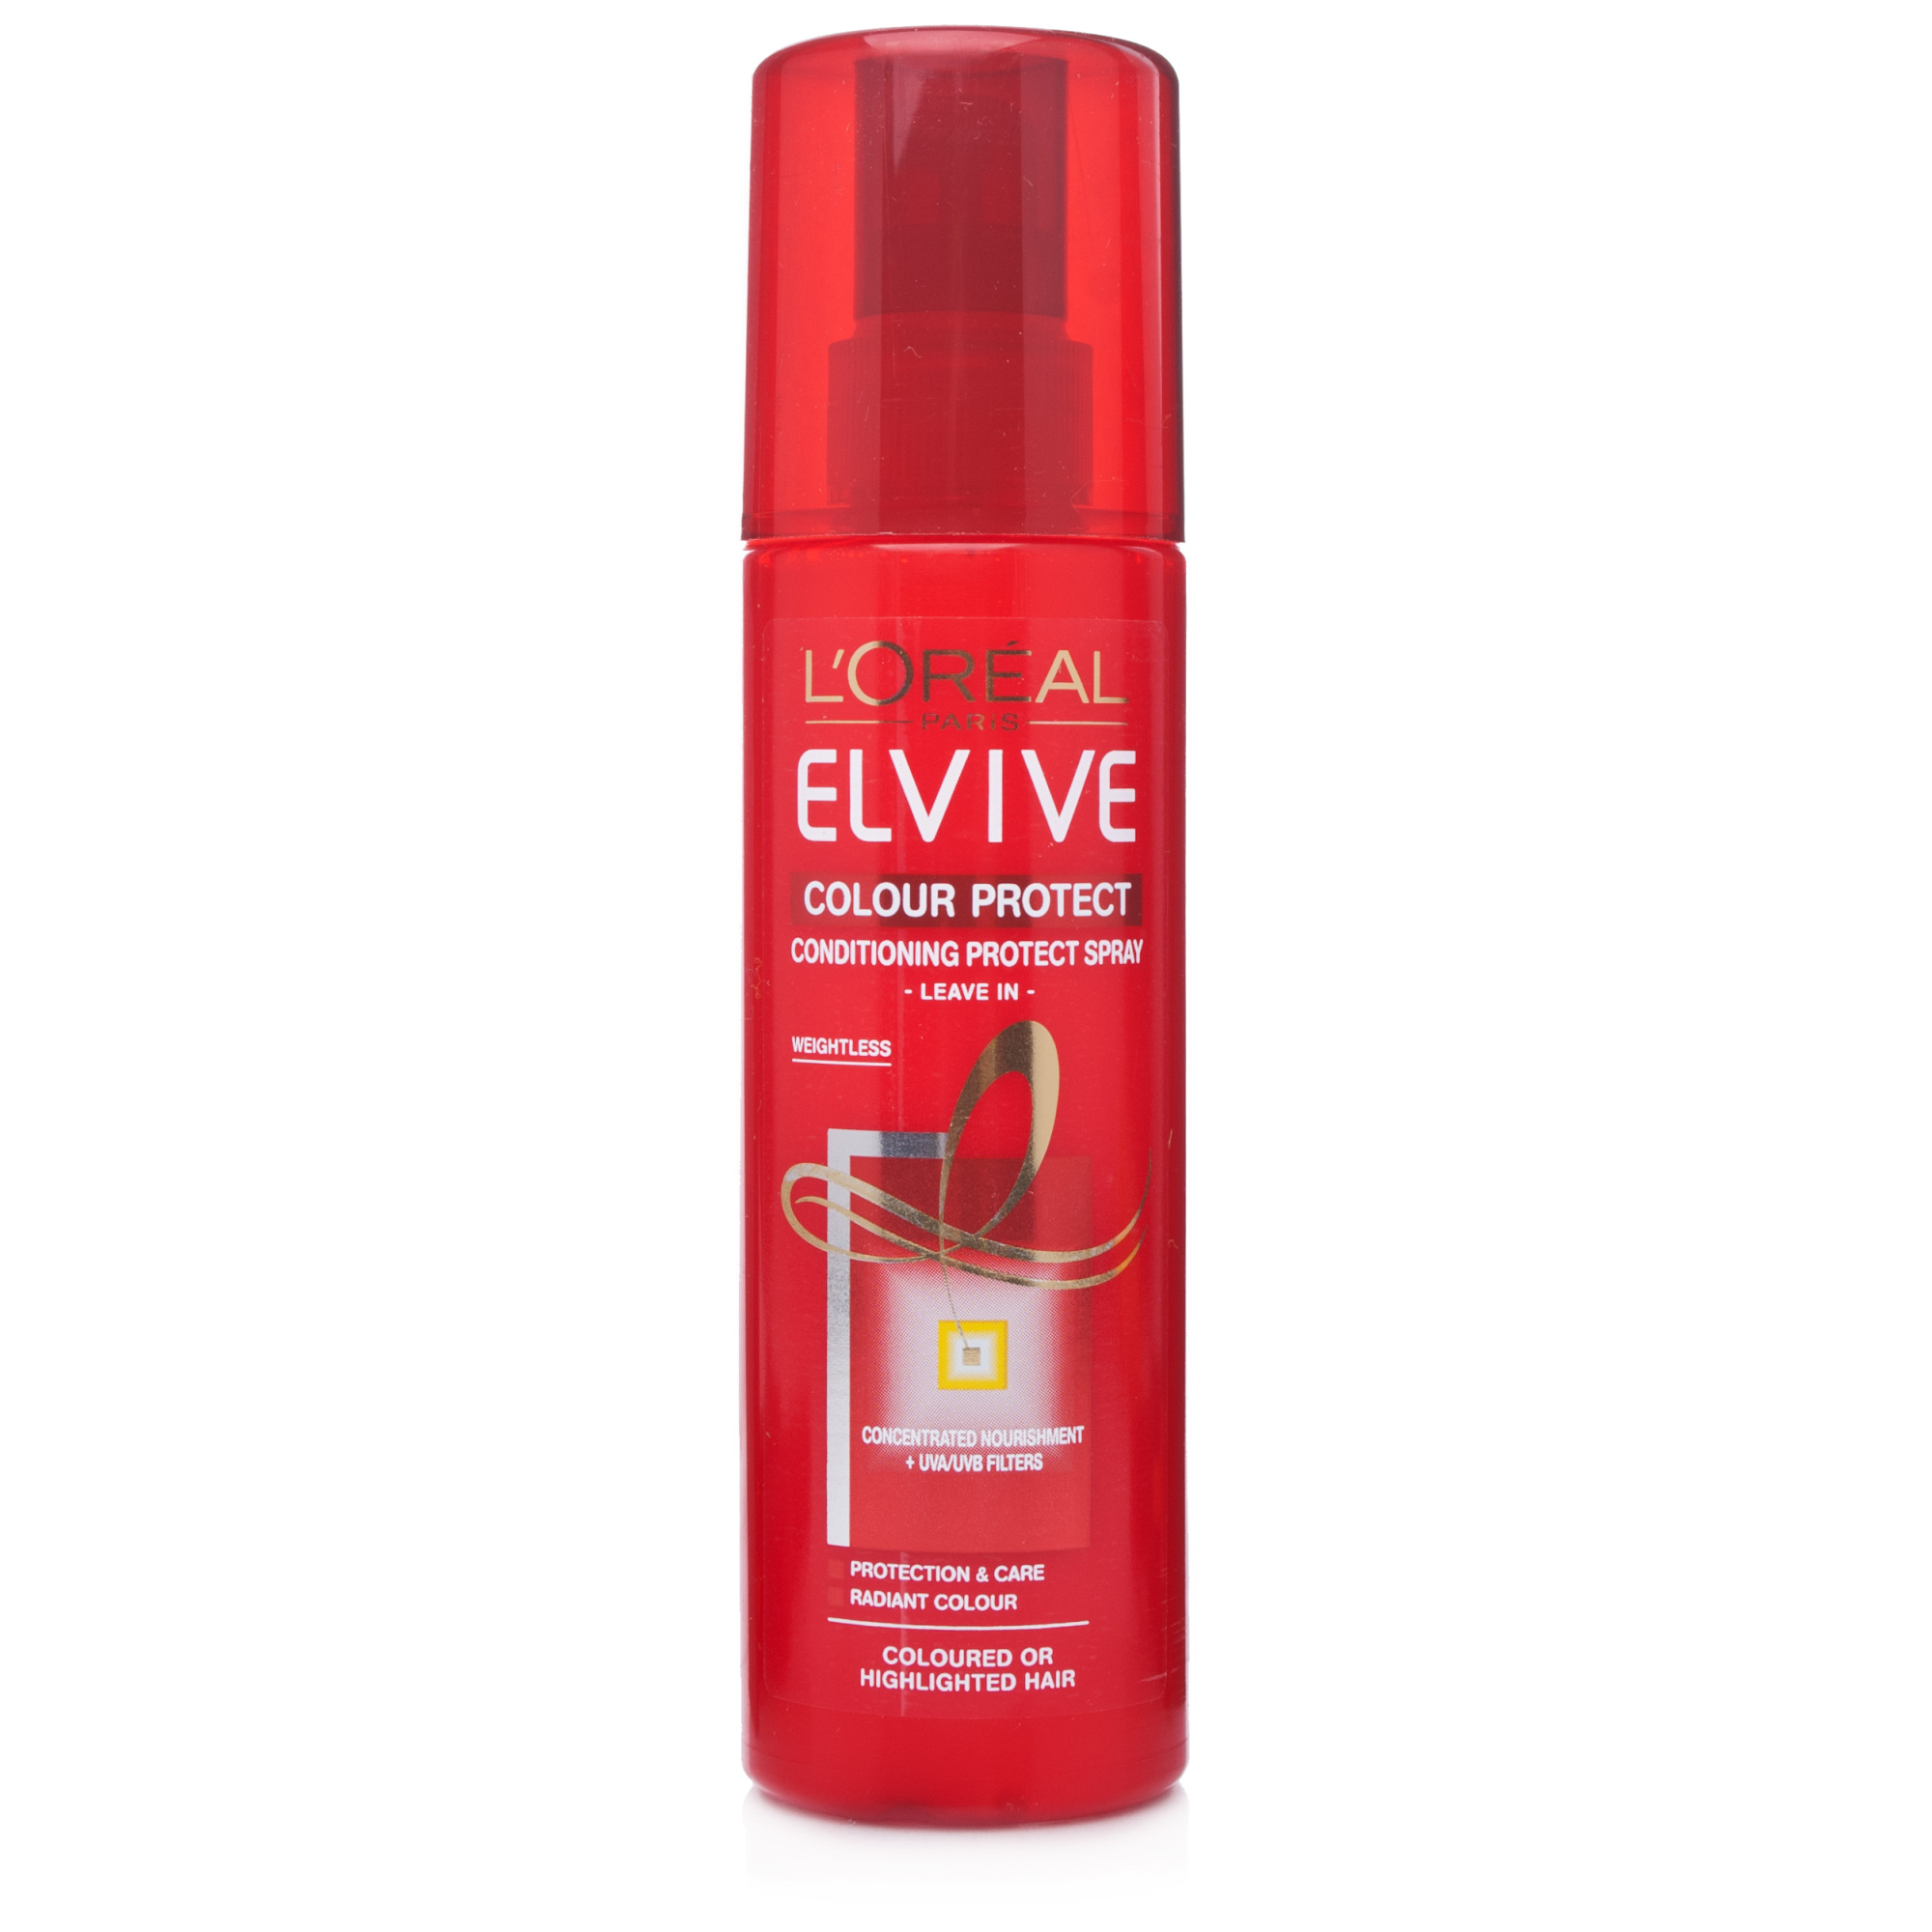 L'Oreal Elvive Colour Protect Leave-In Conditioning Spray | Chemist Direct